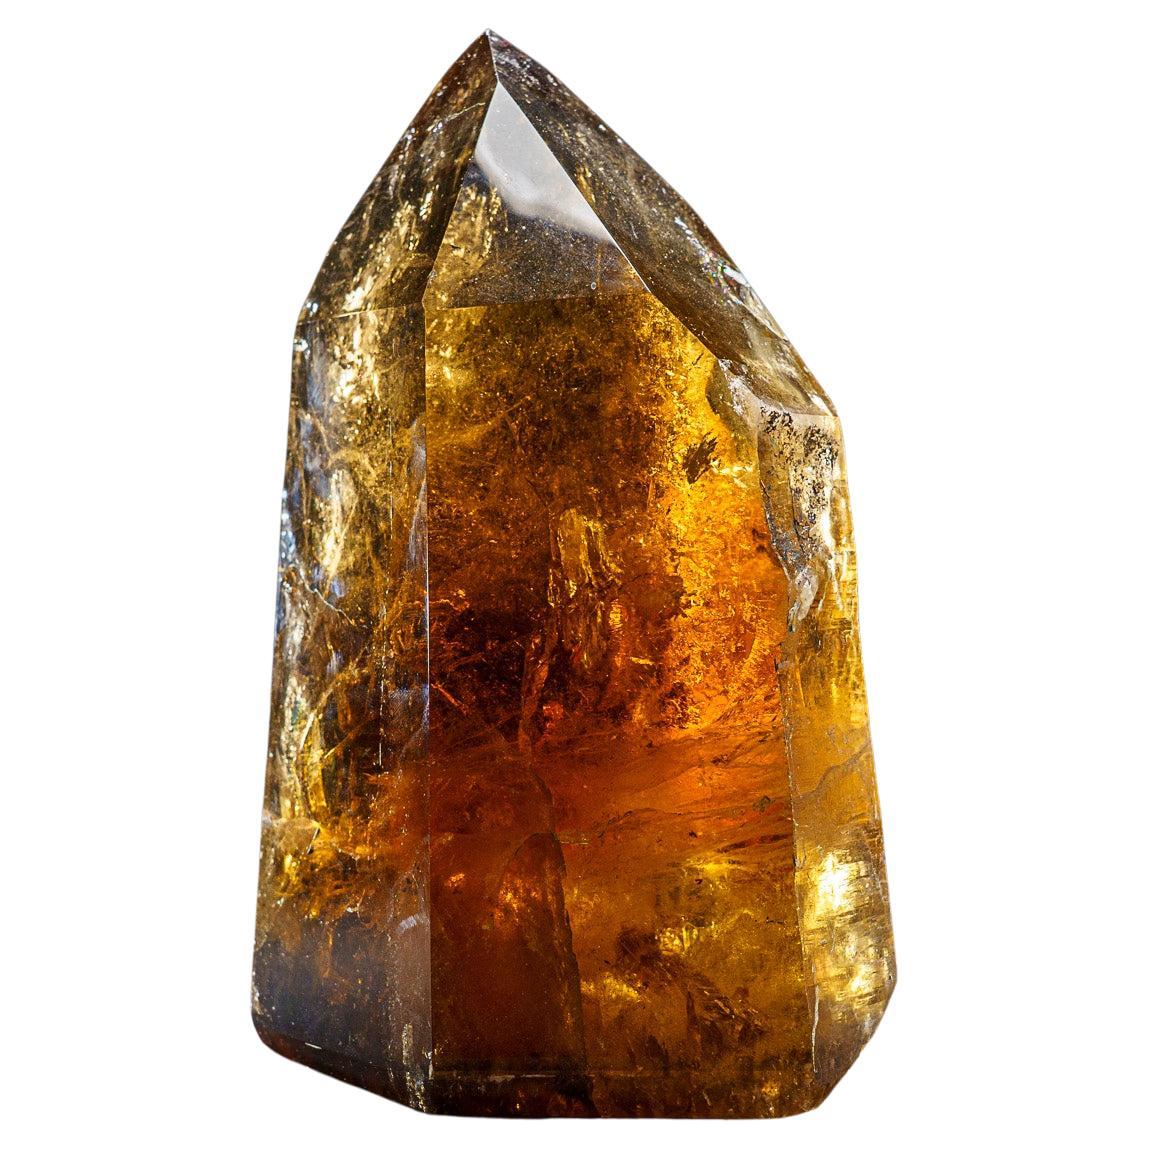 Genuine Large Smoky Quartz Crystal Point From Brazil (12.5 lbs) For Sale